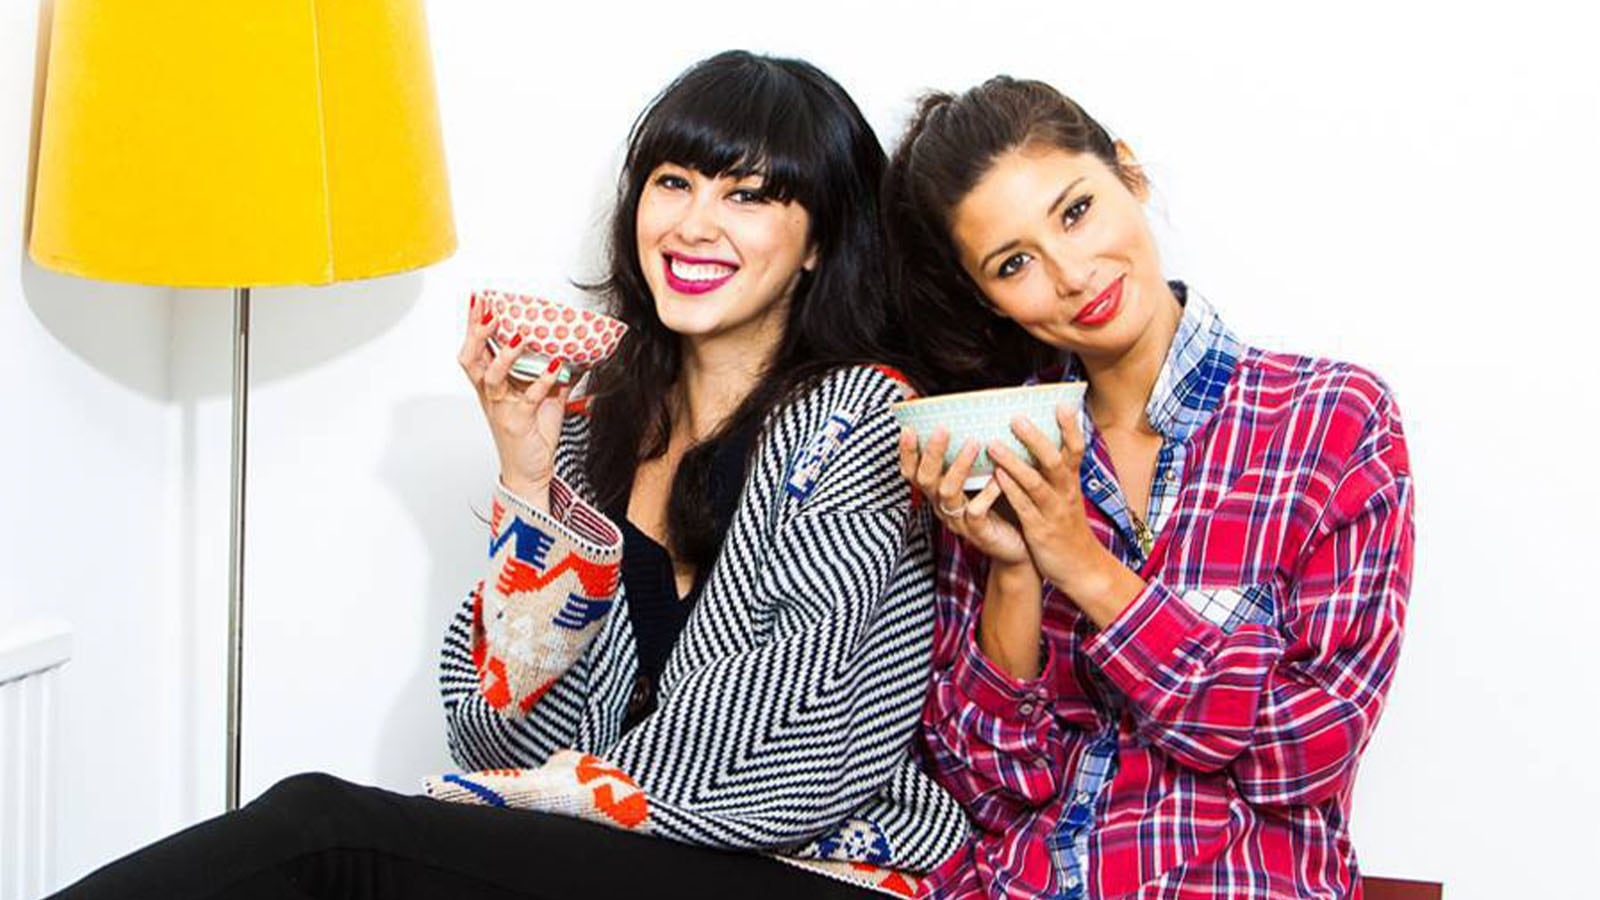 Eating For Better Digestion and Beauty with The Hemsley Sisters